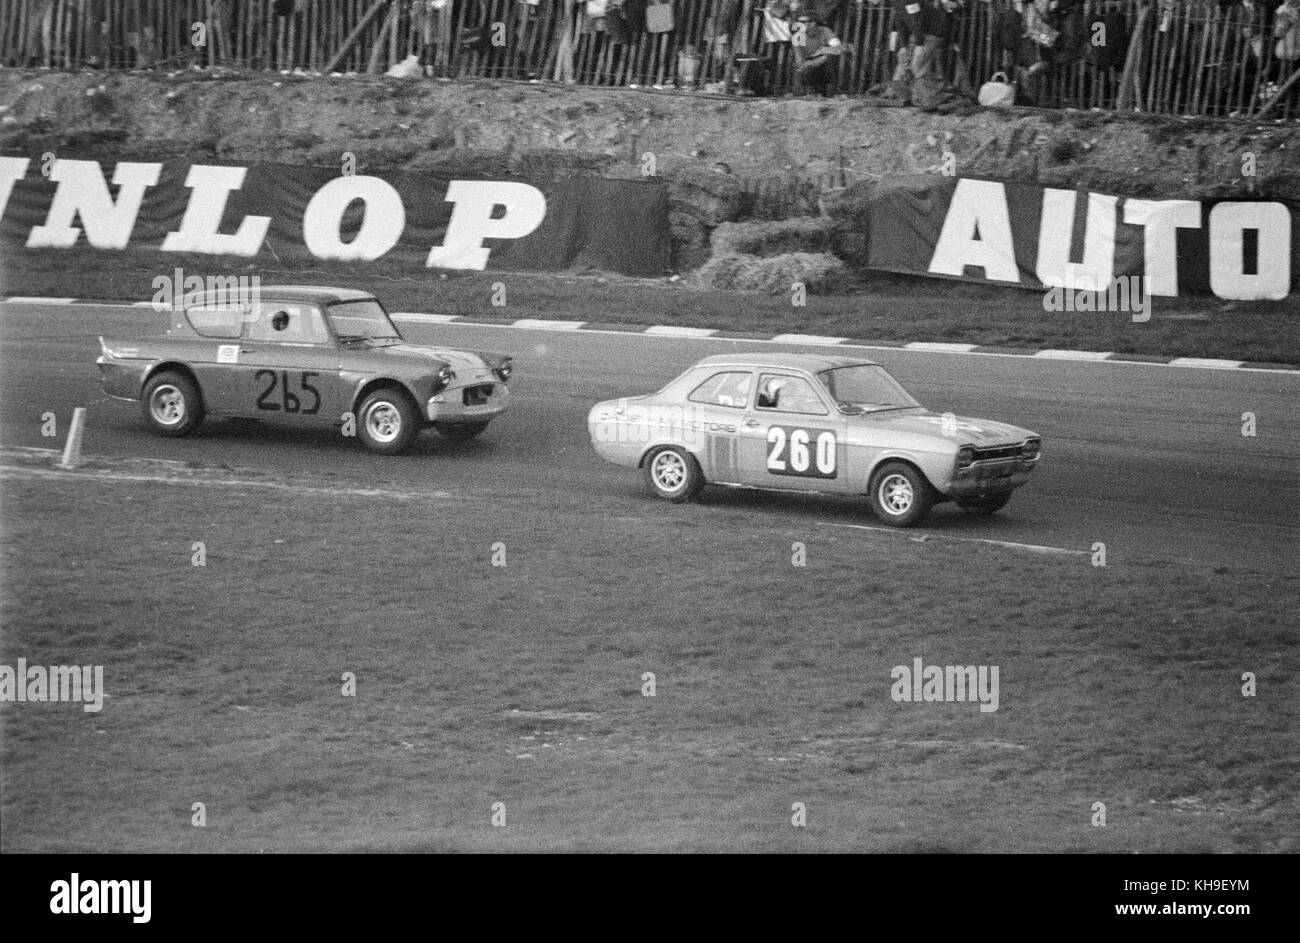 A Ford Escort Mark One, race number 260, land sponsored by Dagenham Motors, leads a Ford Anglia, race number 265, at a race at the Brands Hatch circuit in England in 1968. Stock Photo